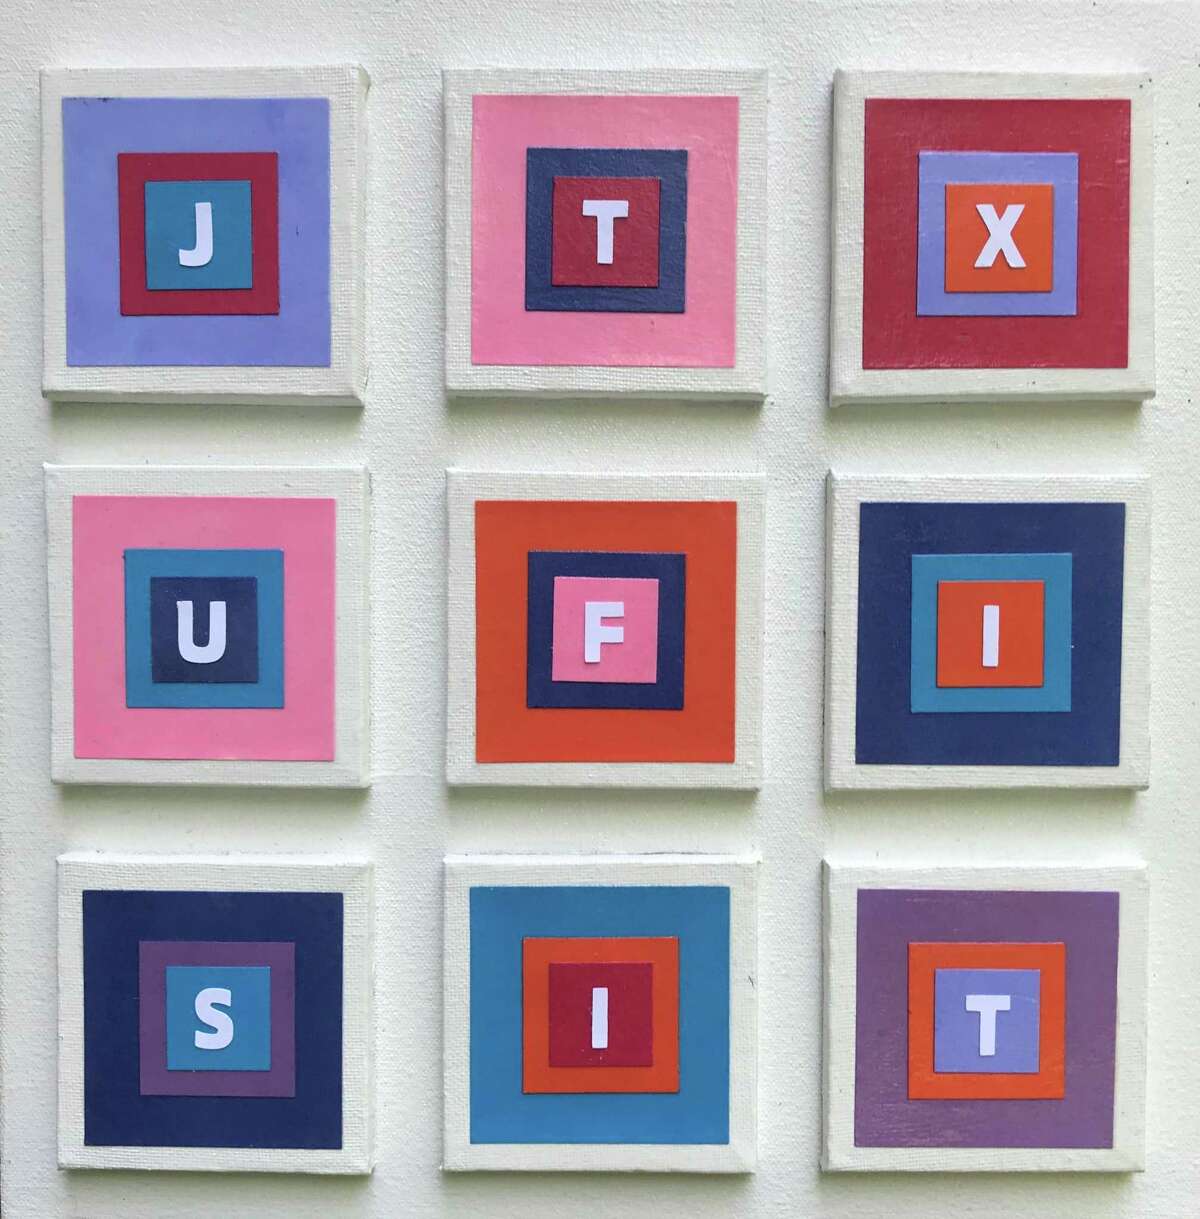 Marian Wulffleff’s “Reasonable Request” will be featured in the “Art & Text” exhibit at the Wilton Library.